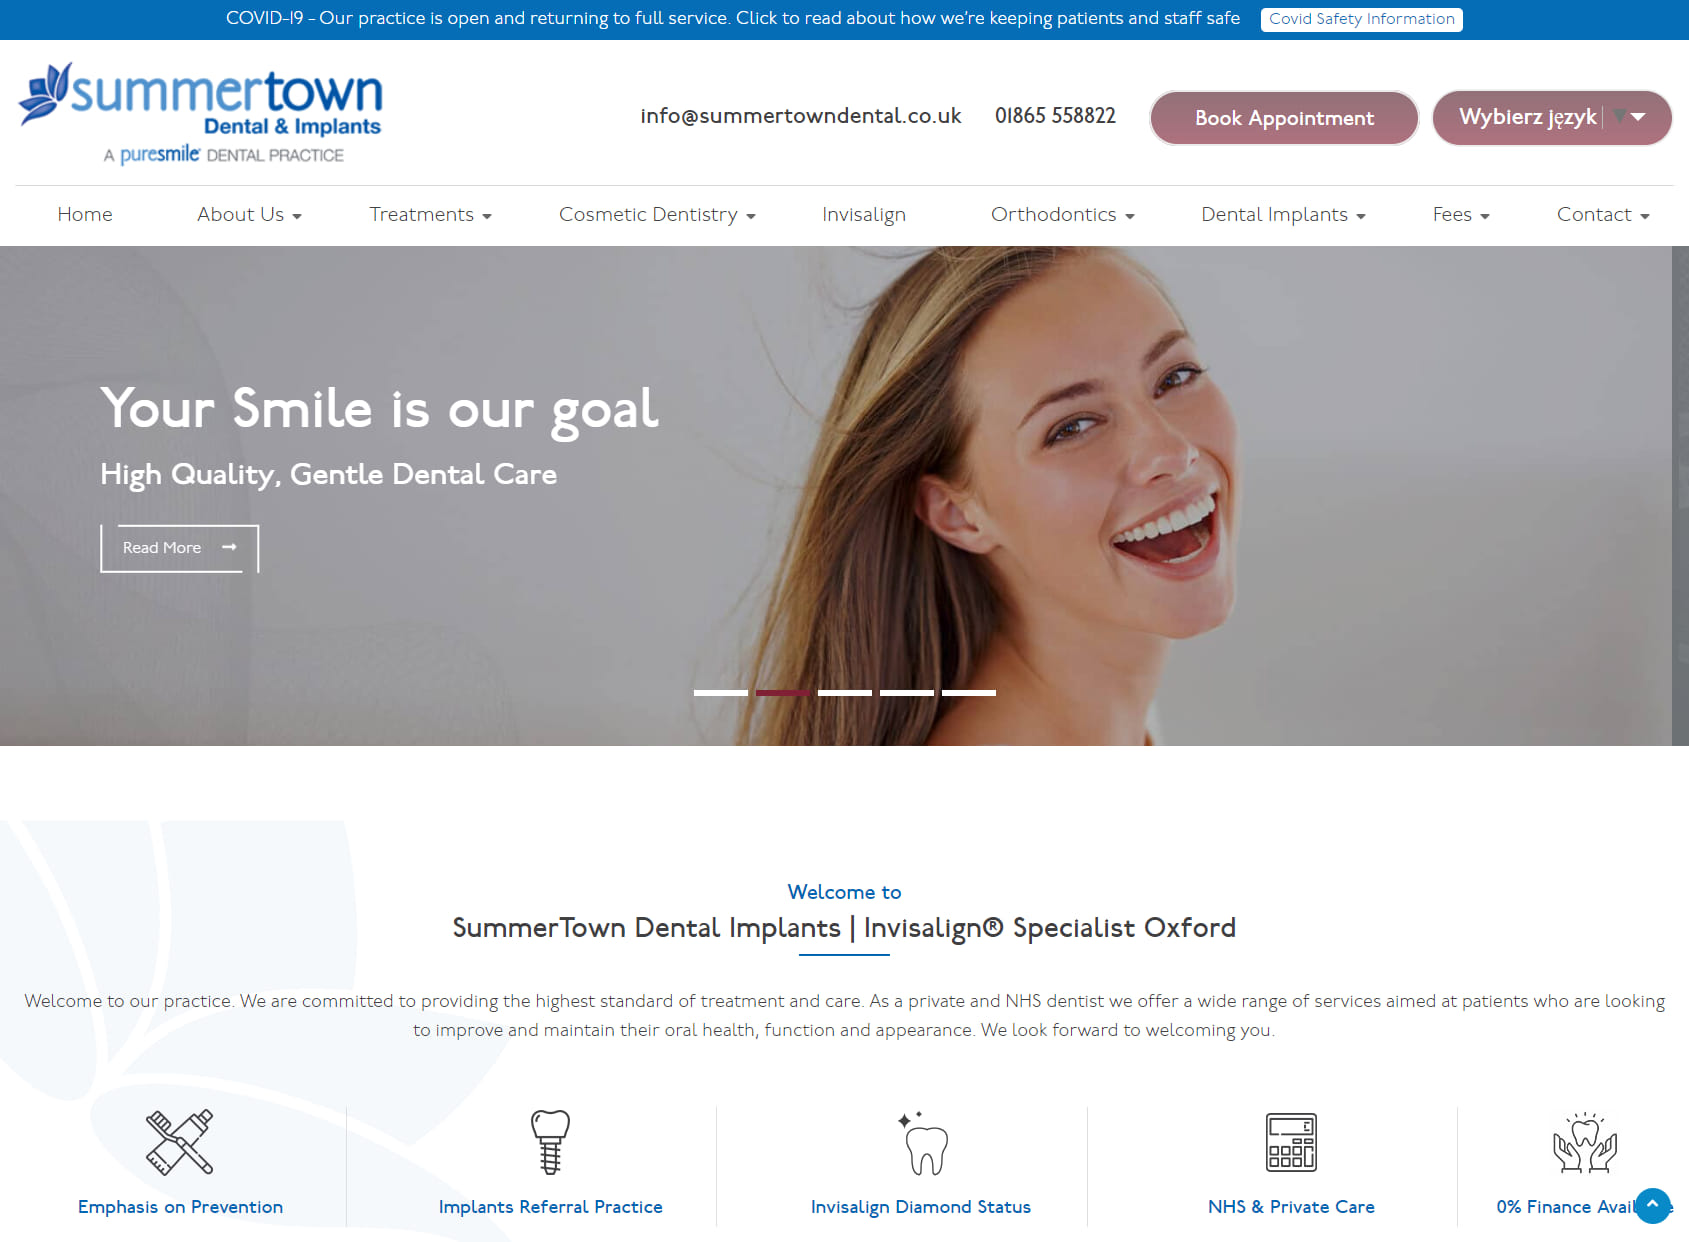 Summertown Dental and Implants